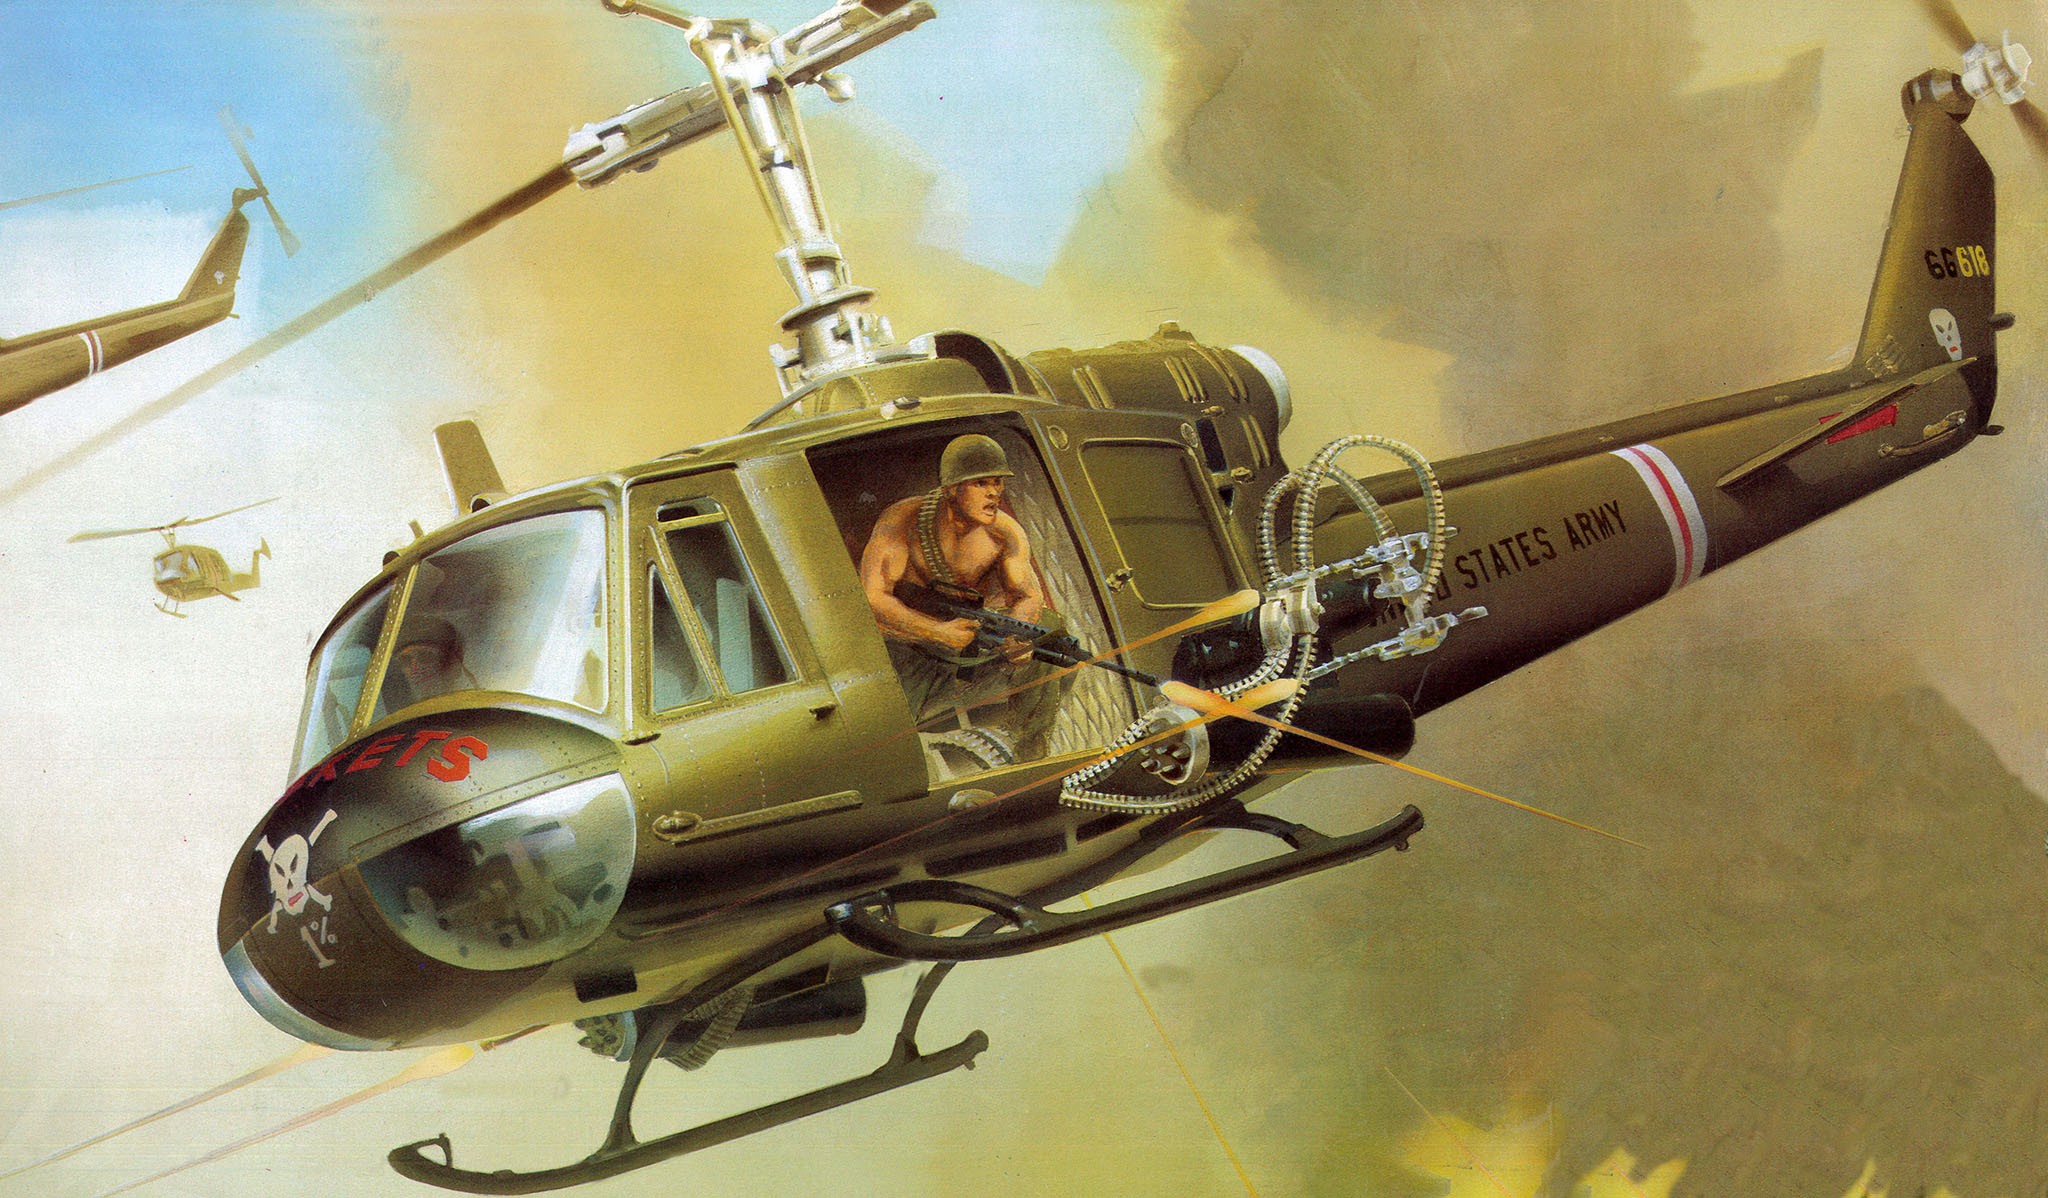 General 2048x1198 aircraft flying army military military vehicle artwork soldier helmet gun clouds muscles helicopters shirtless United States Army M16 Vietnam War Boxart